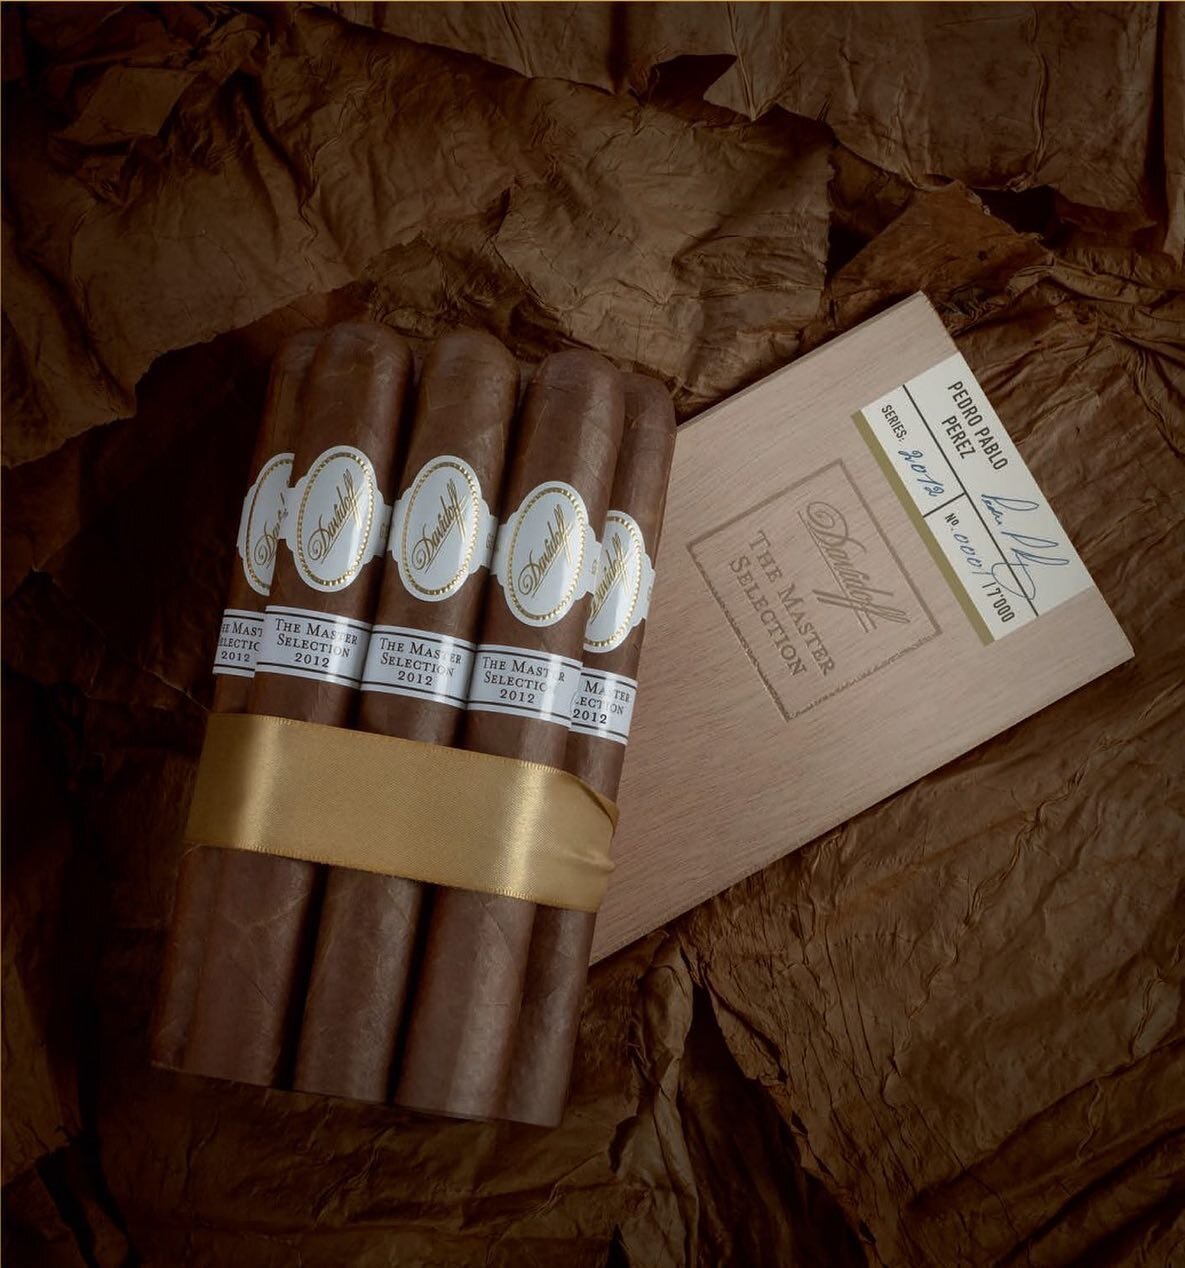 Coming soon!! Davidoff Master Selection 2012.

Created as a blend for Davidoff Master Blenders to enjoy themselves in 2012, these cigars were rolled 2 years ago and have been aging under careful supervision ever since. 

Every year Davidoff&rsquo;s h